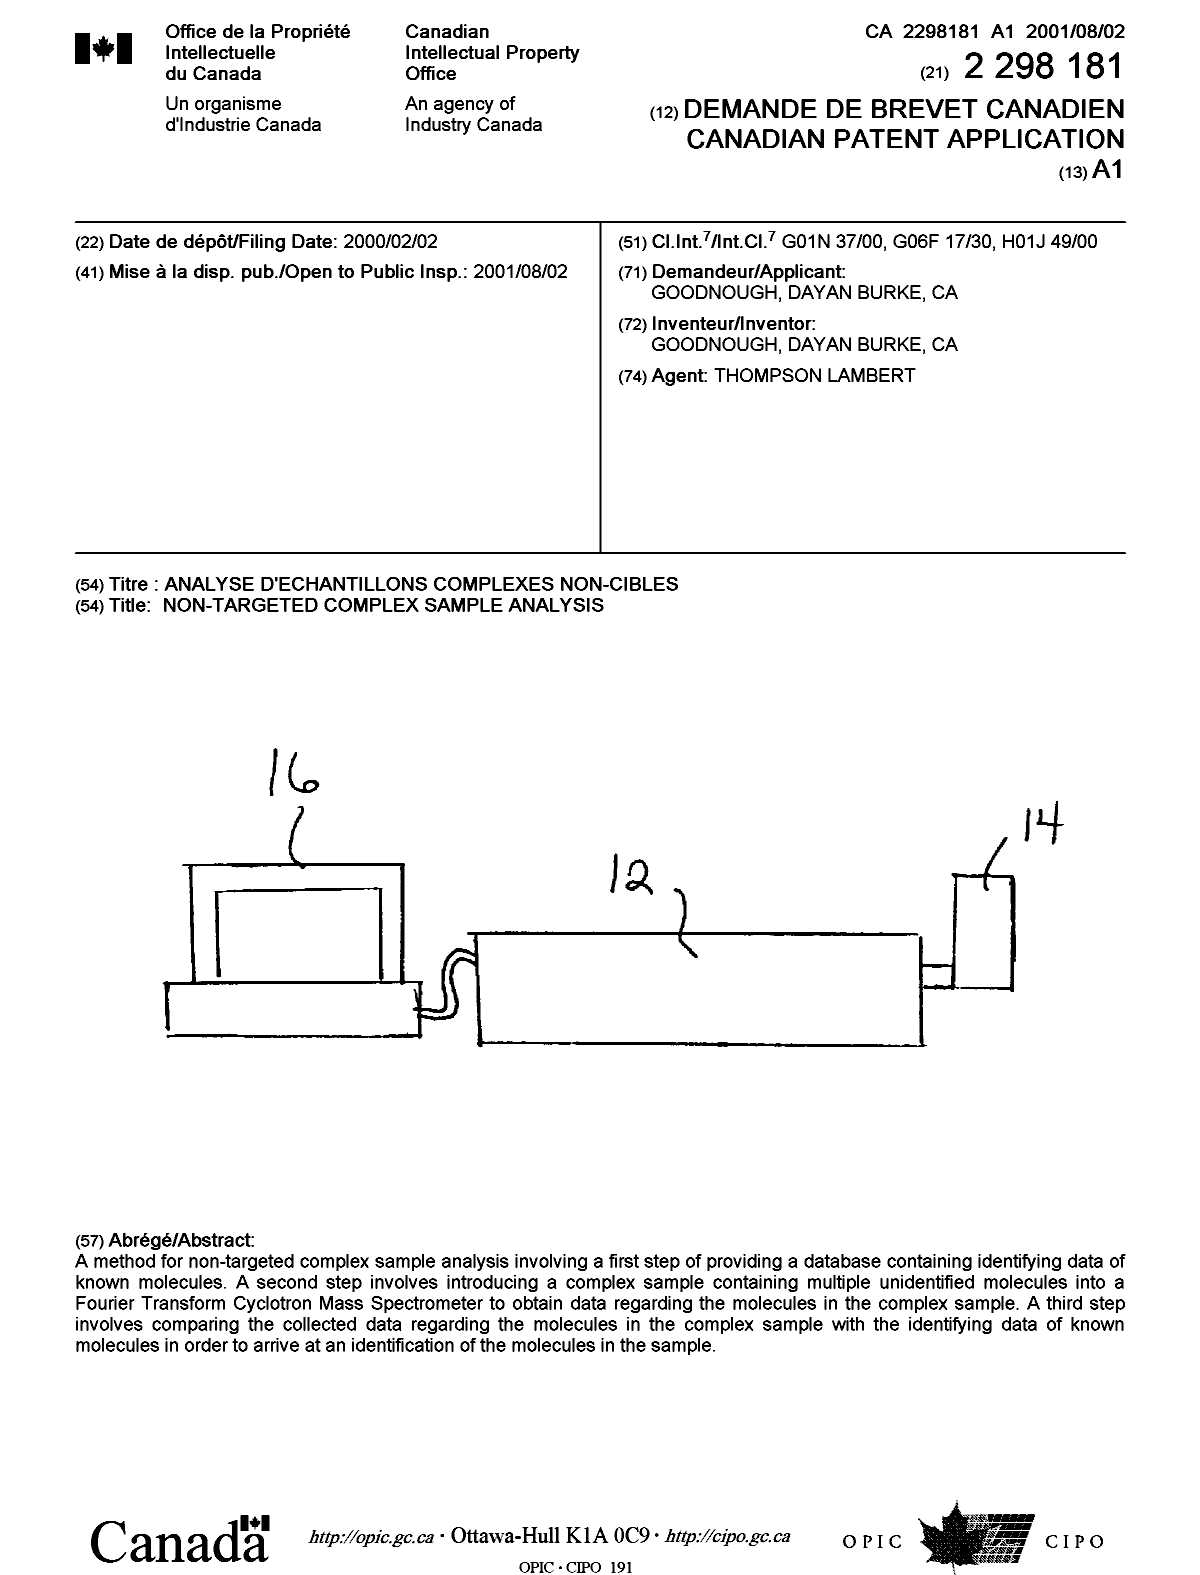 Canadian Patent Document 2298181. Cover Page 20010706. Image 1 of 1